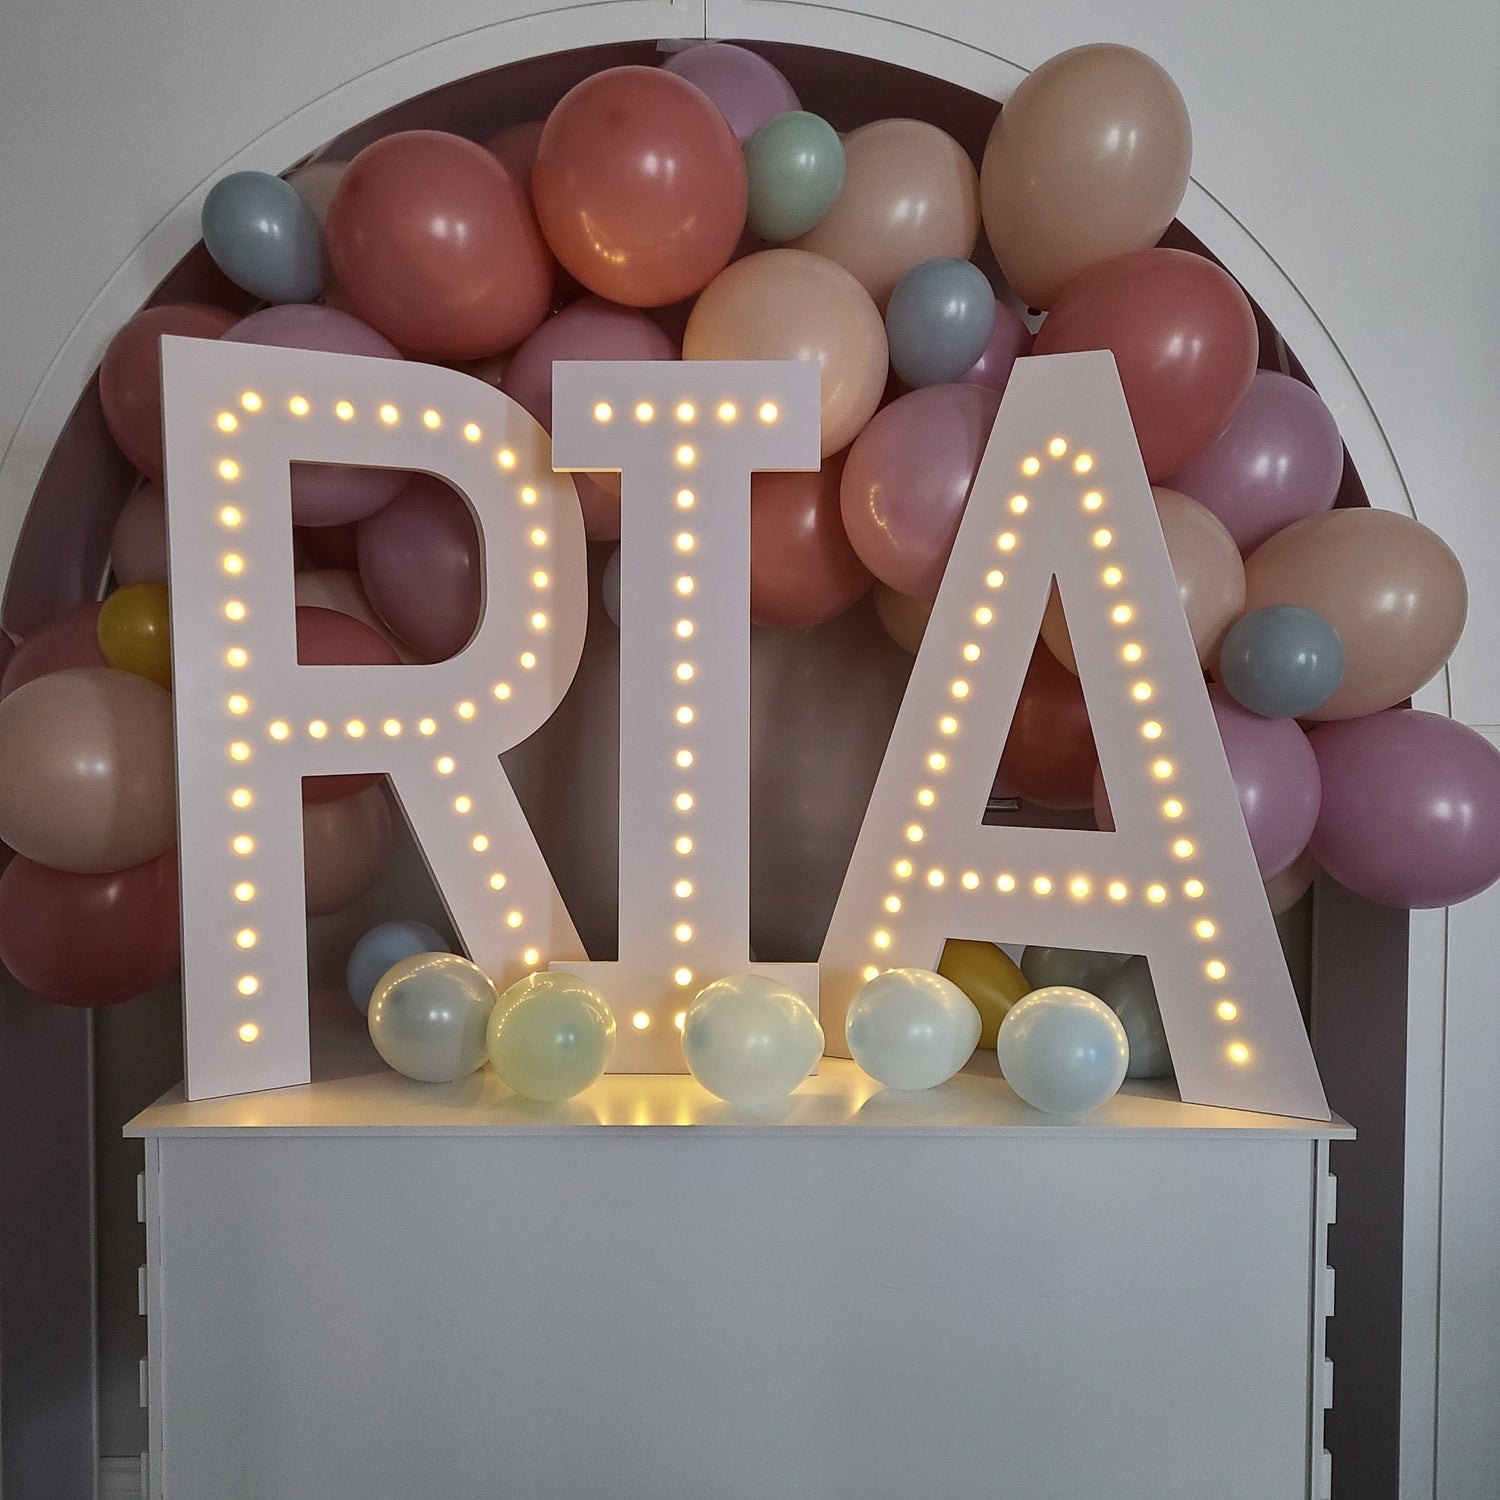 Letter Birthday decorations, Letter Party decorations, party decorations, party decor, marquee letters, light up letters, Letter event decor, birthday decorations